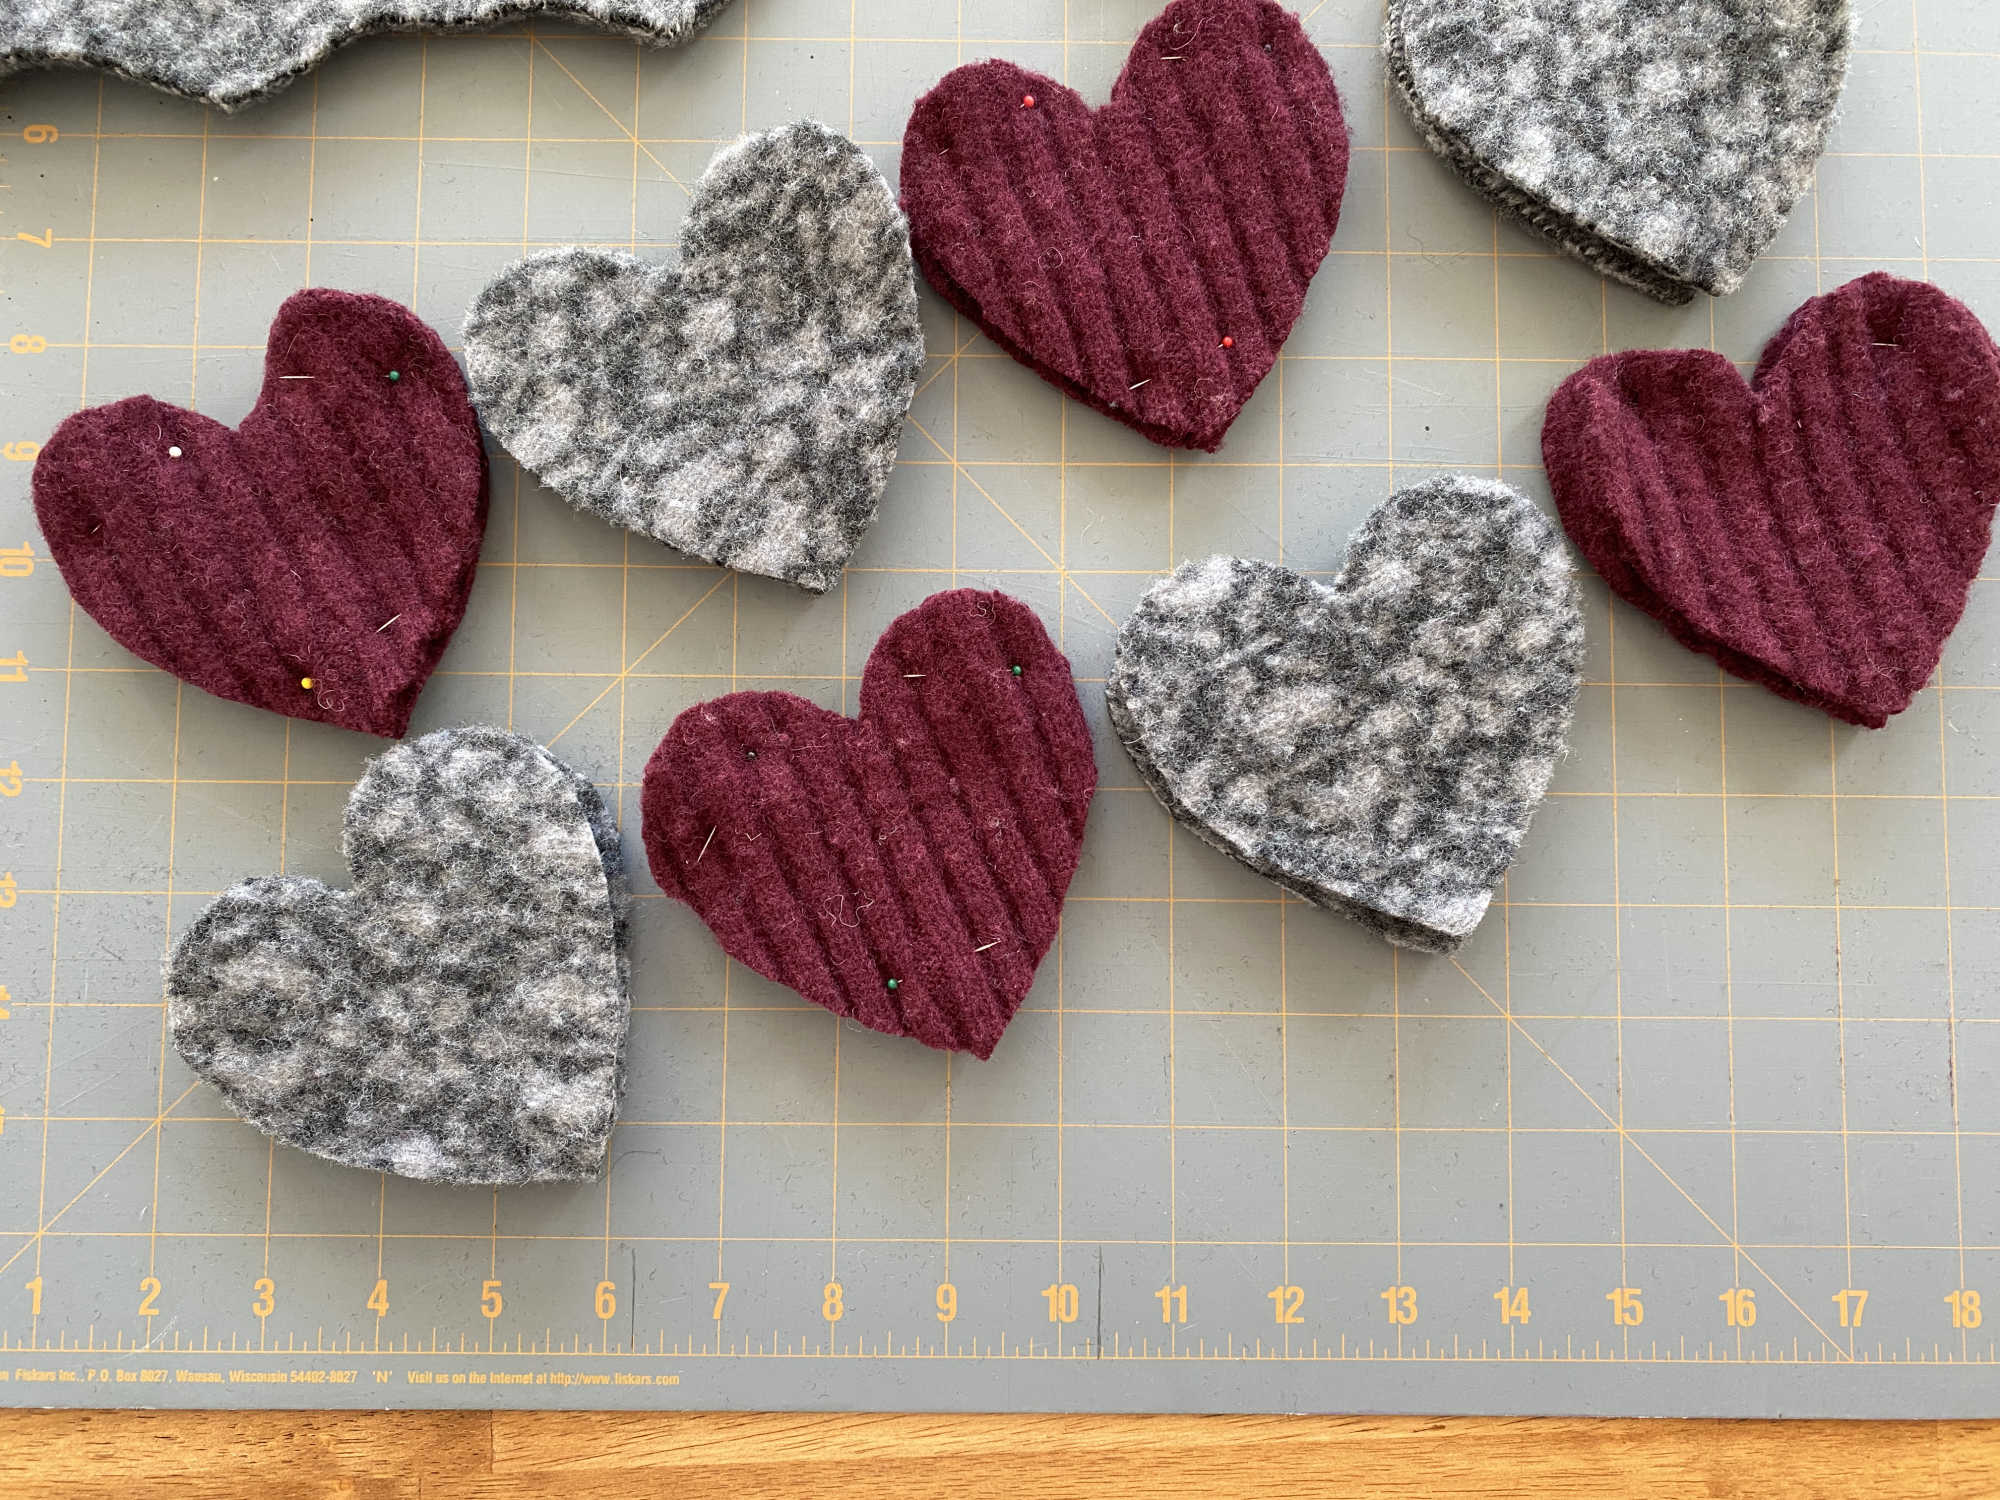 Two rows of alternating maroon and grey felted hearts, pinned and prepped for sewing.